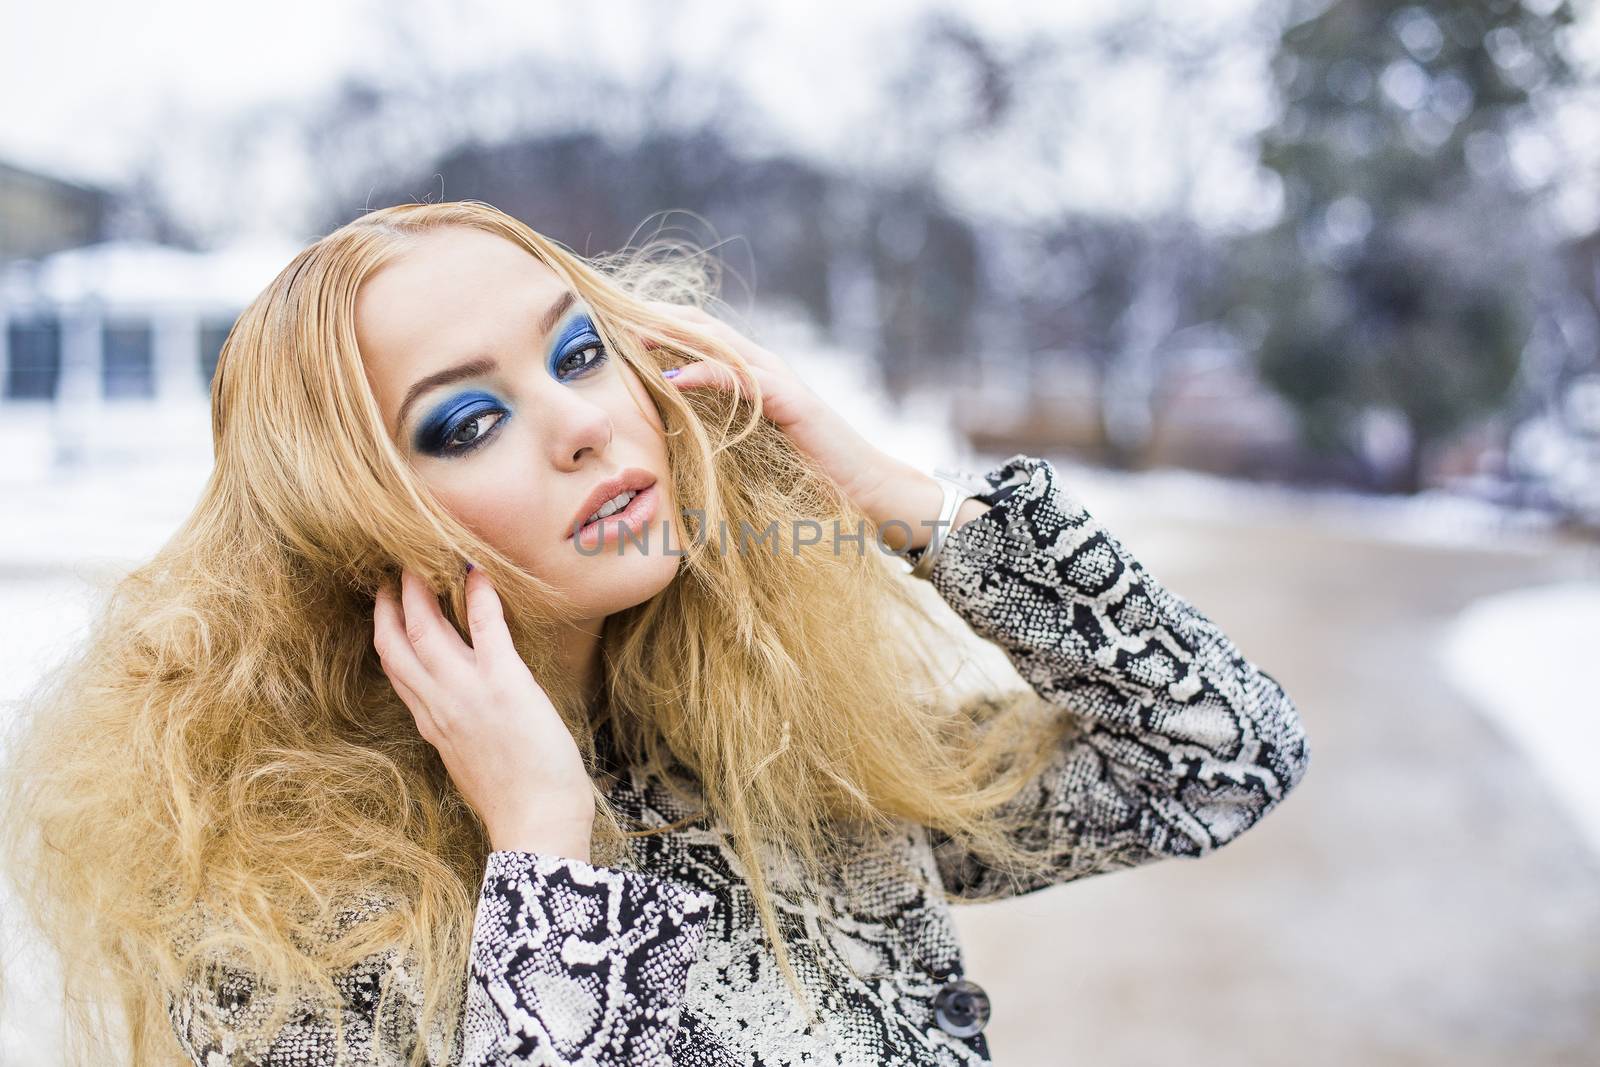 Girl with a blue makeup is walking in the park